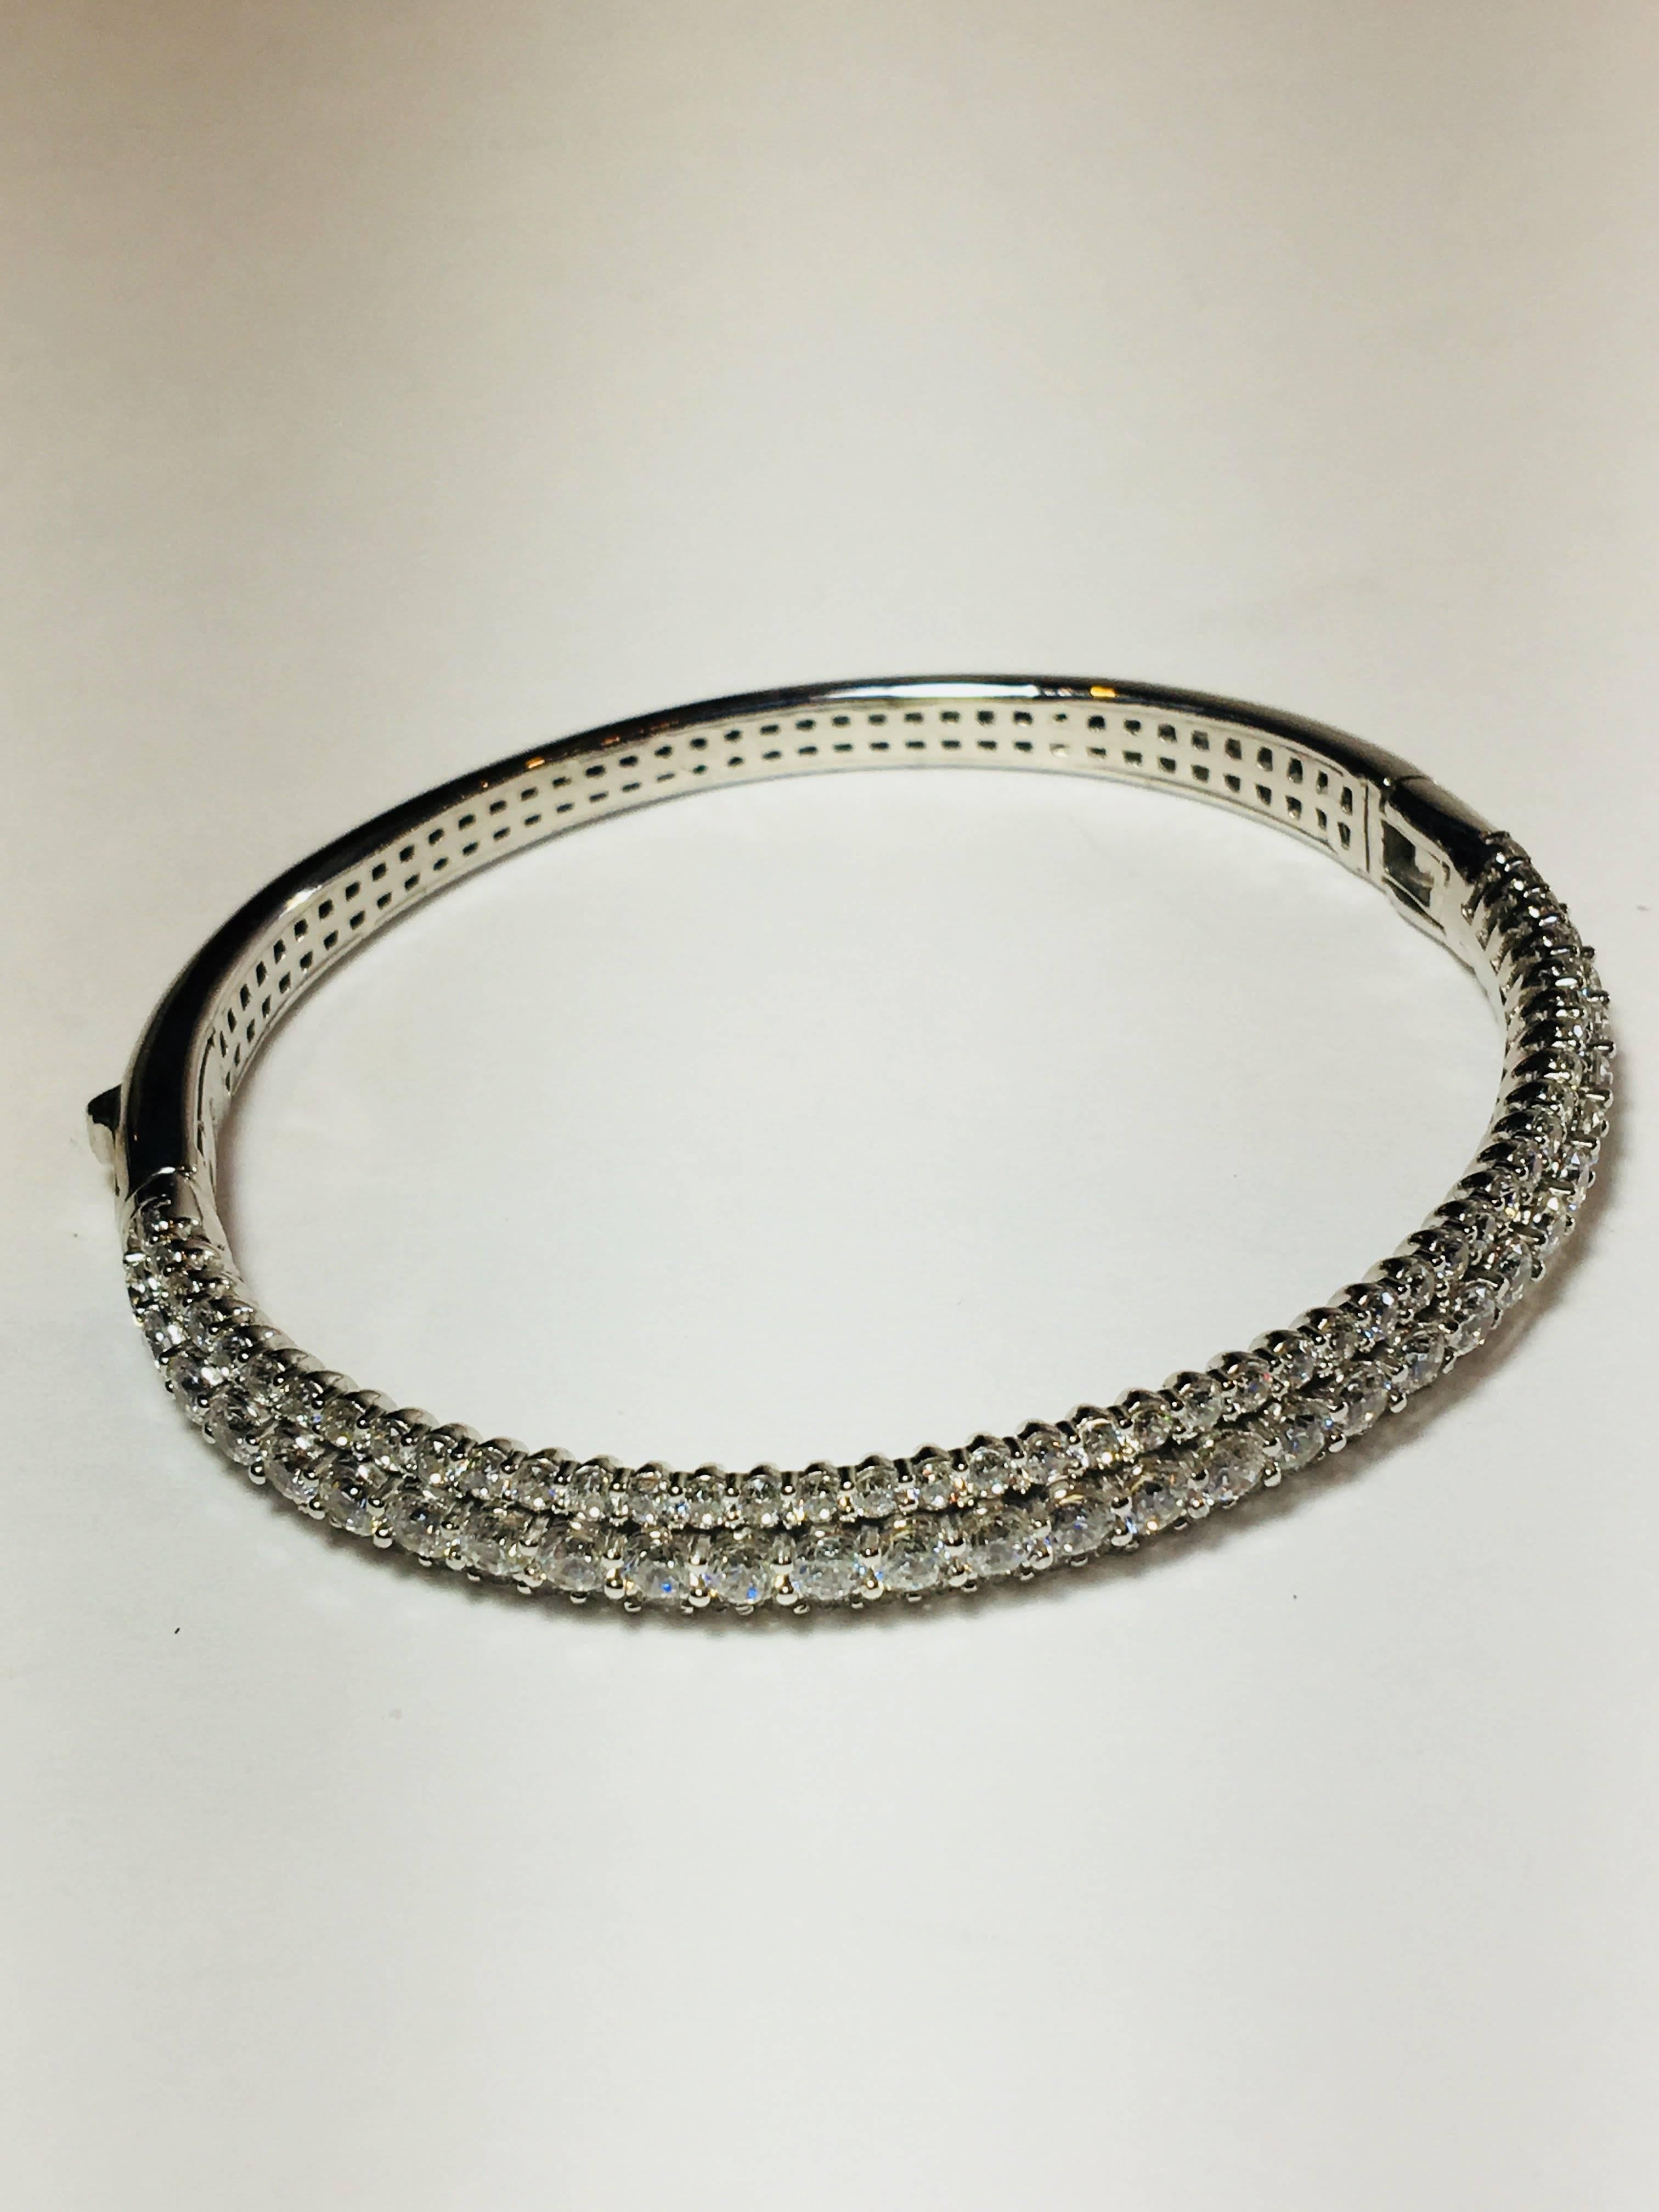 3 Row Pave Hinged Oval Bangle in Silver, CZ.